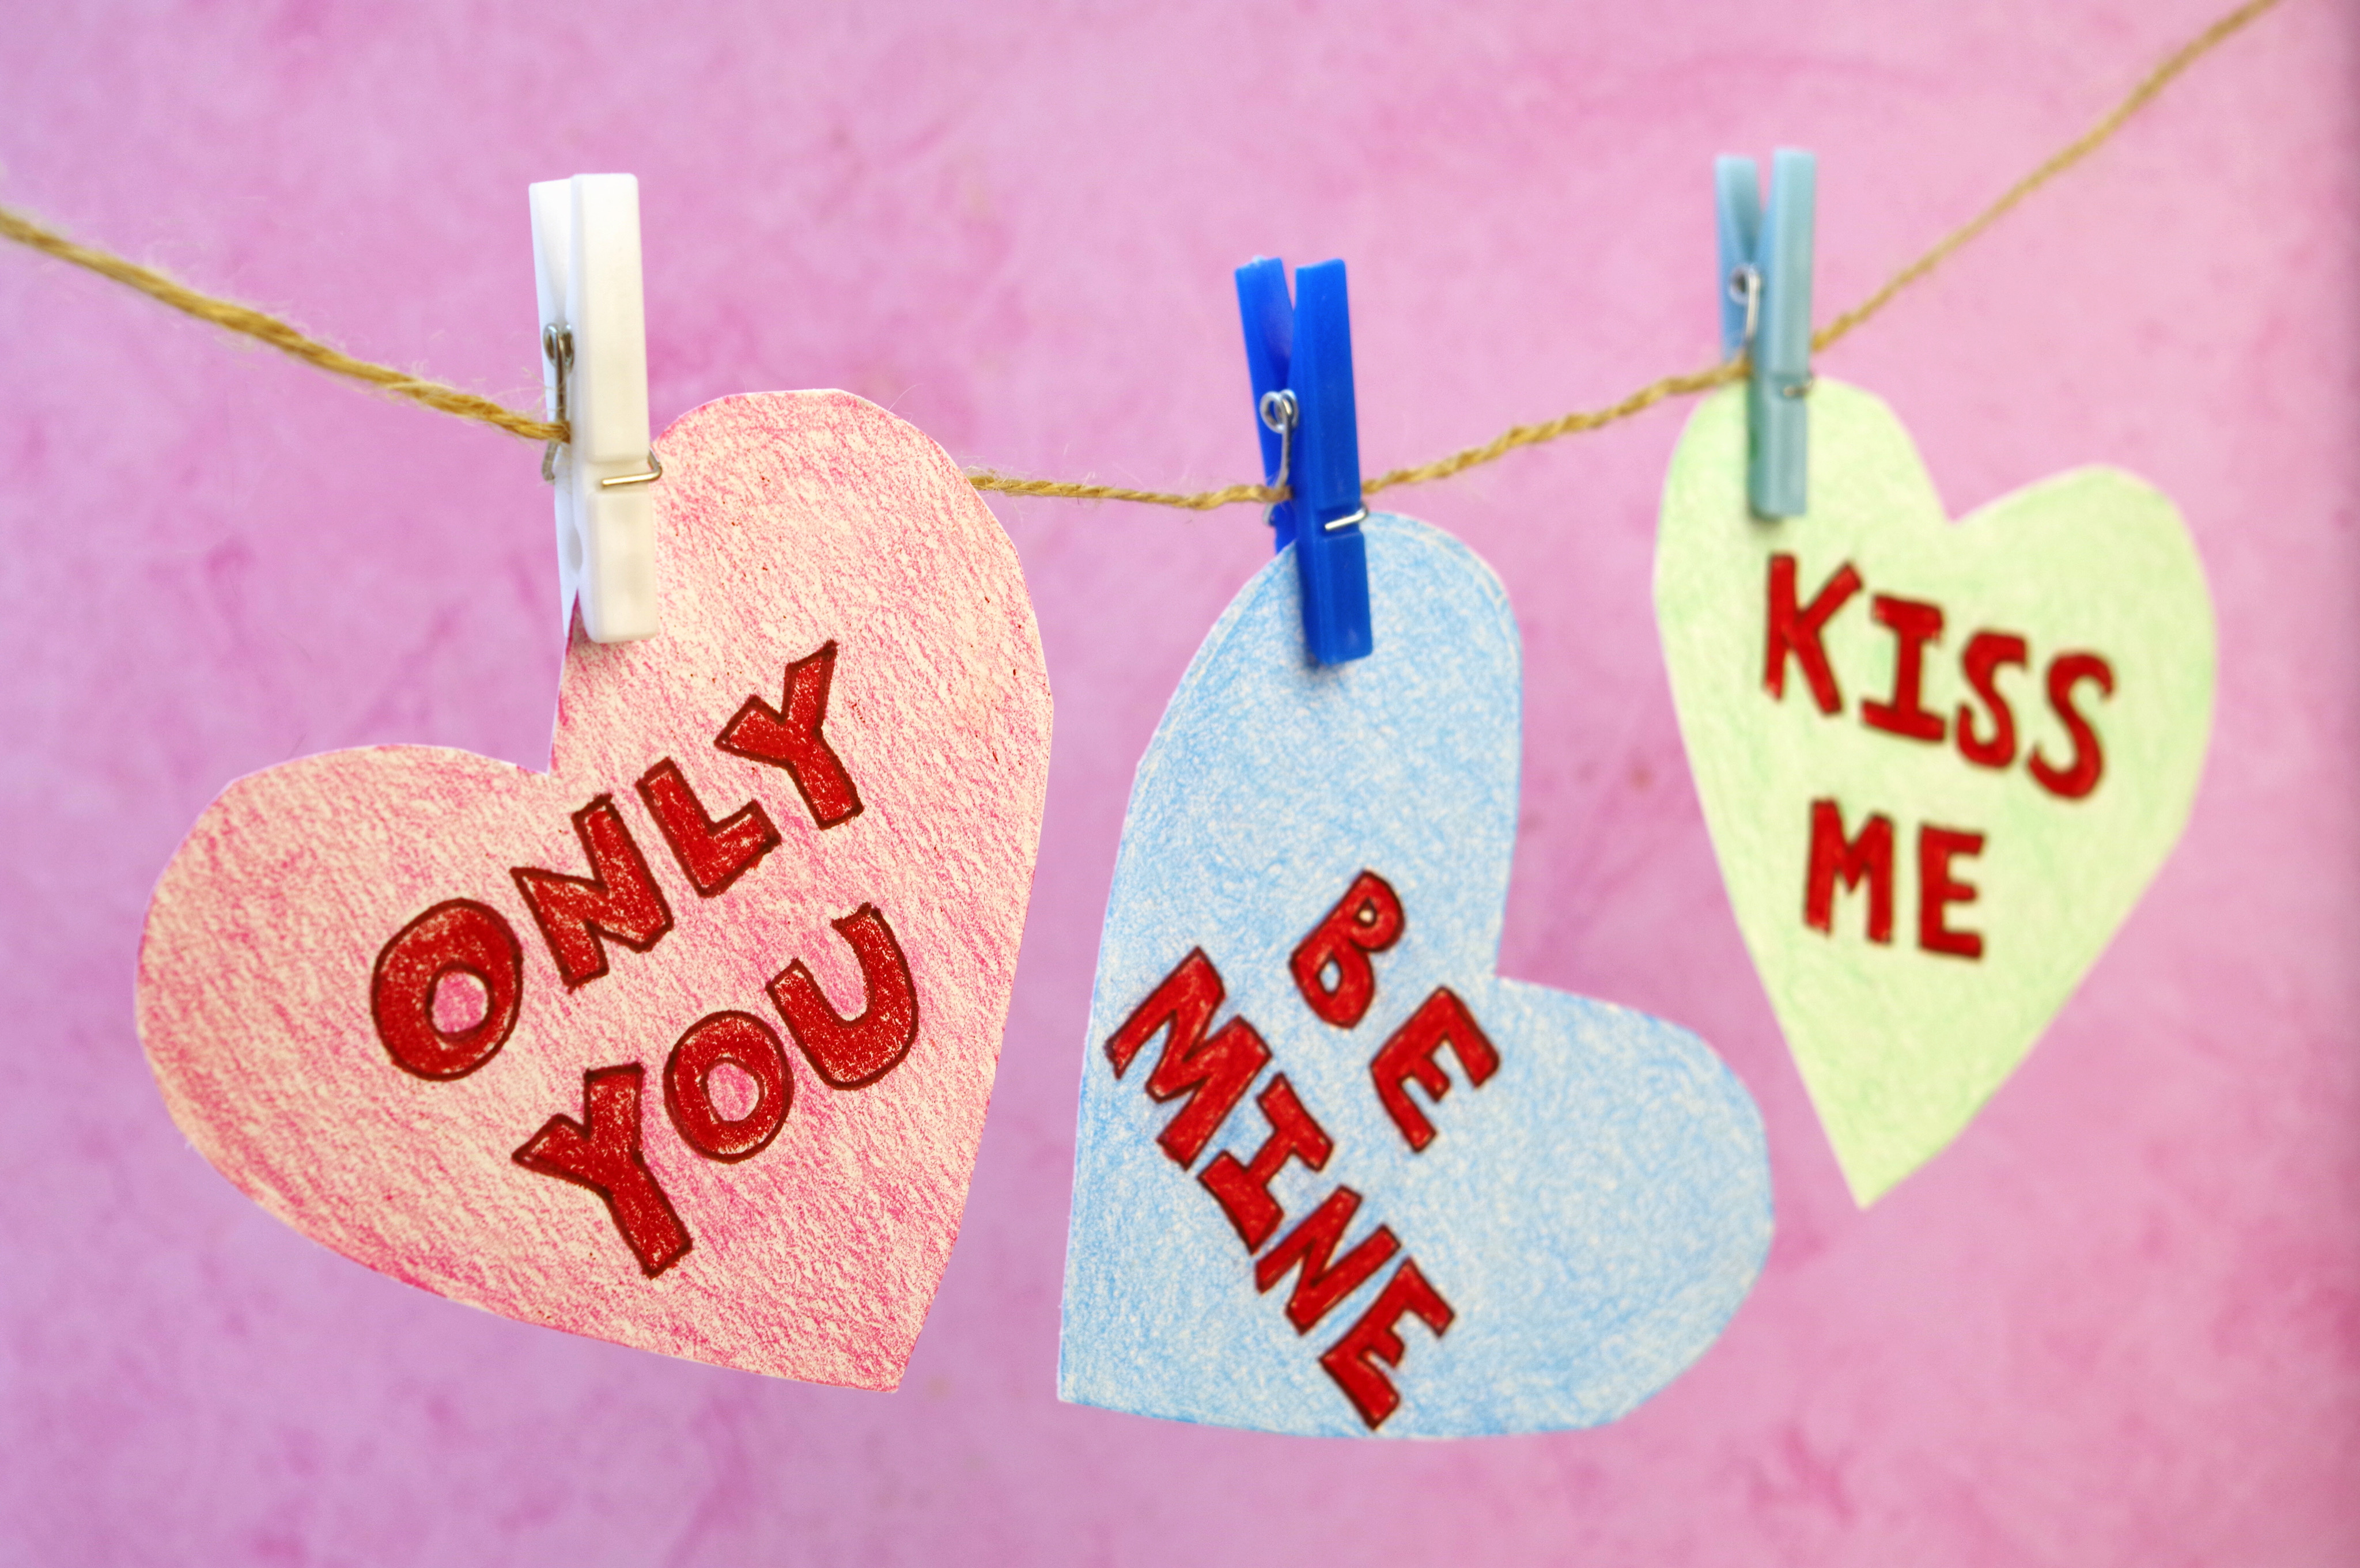 Make your own Valentine's Day card to go the extra mile and add a personal touch